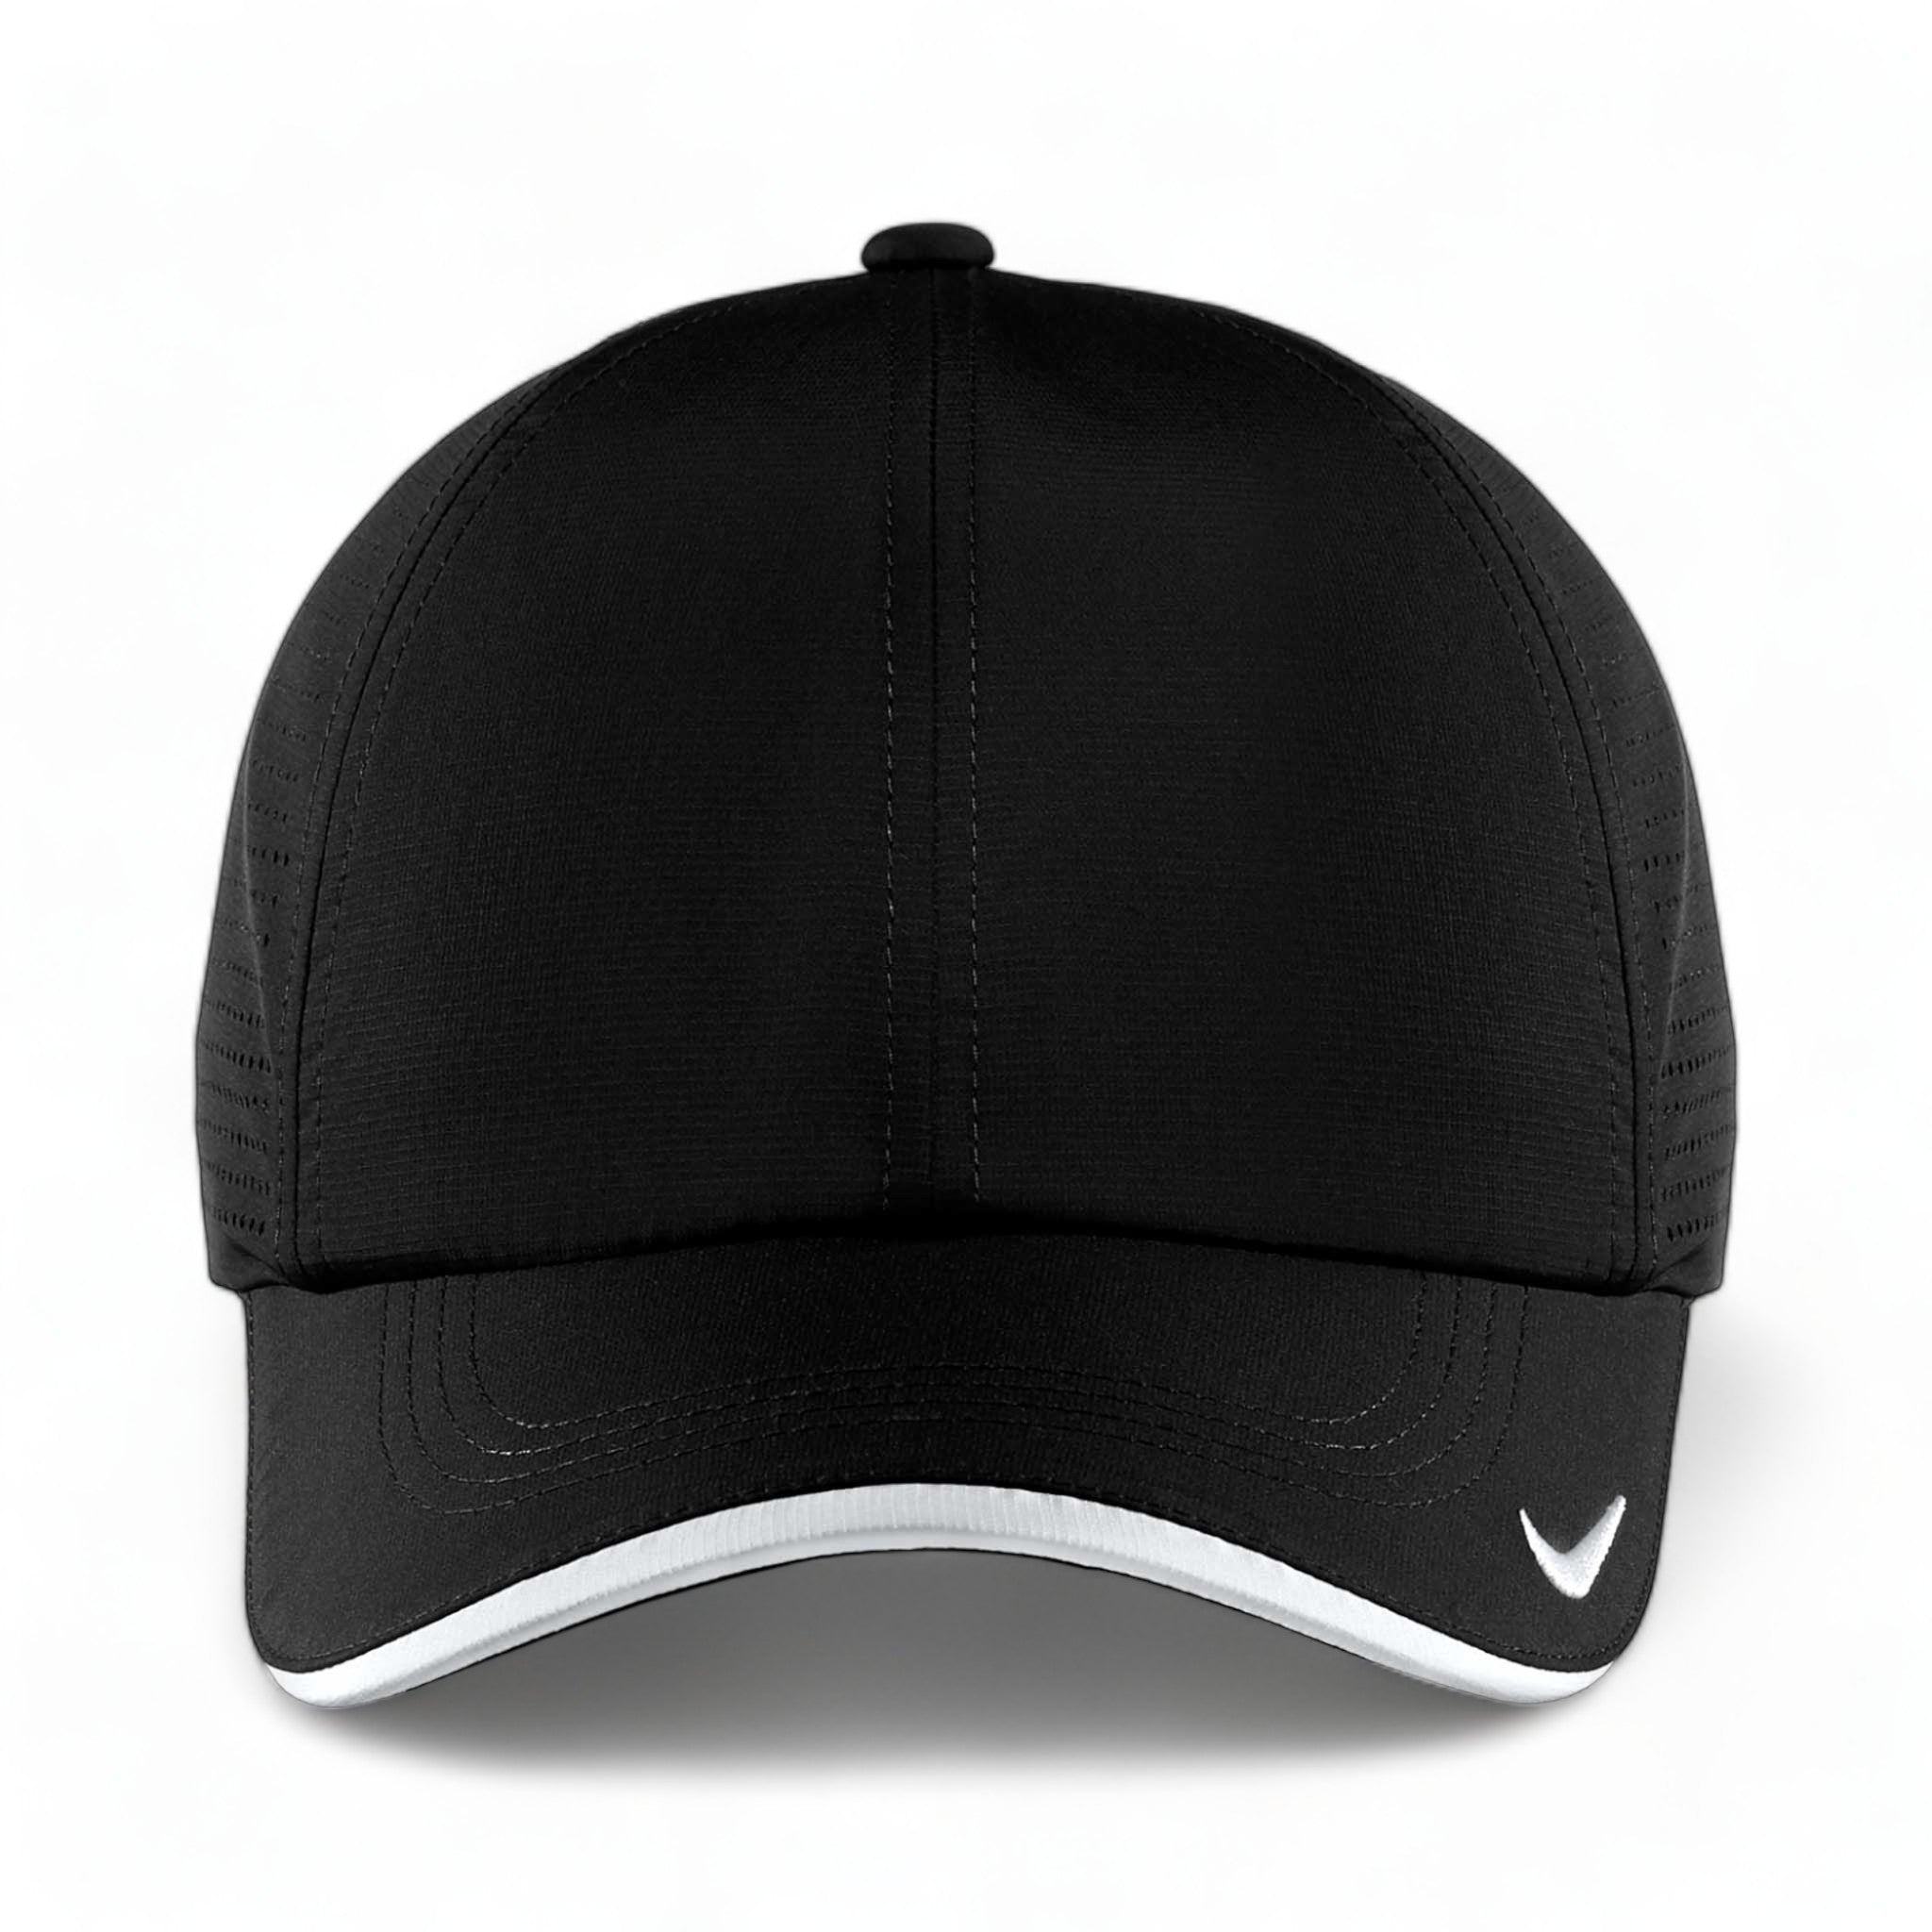 Front view of Nike NKFB6445 custom hat in black and white